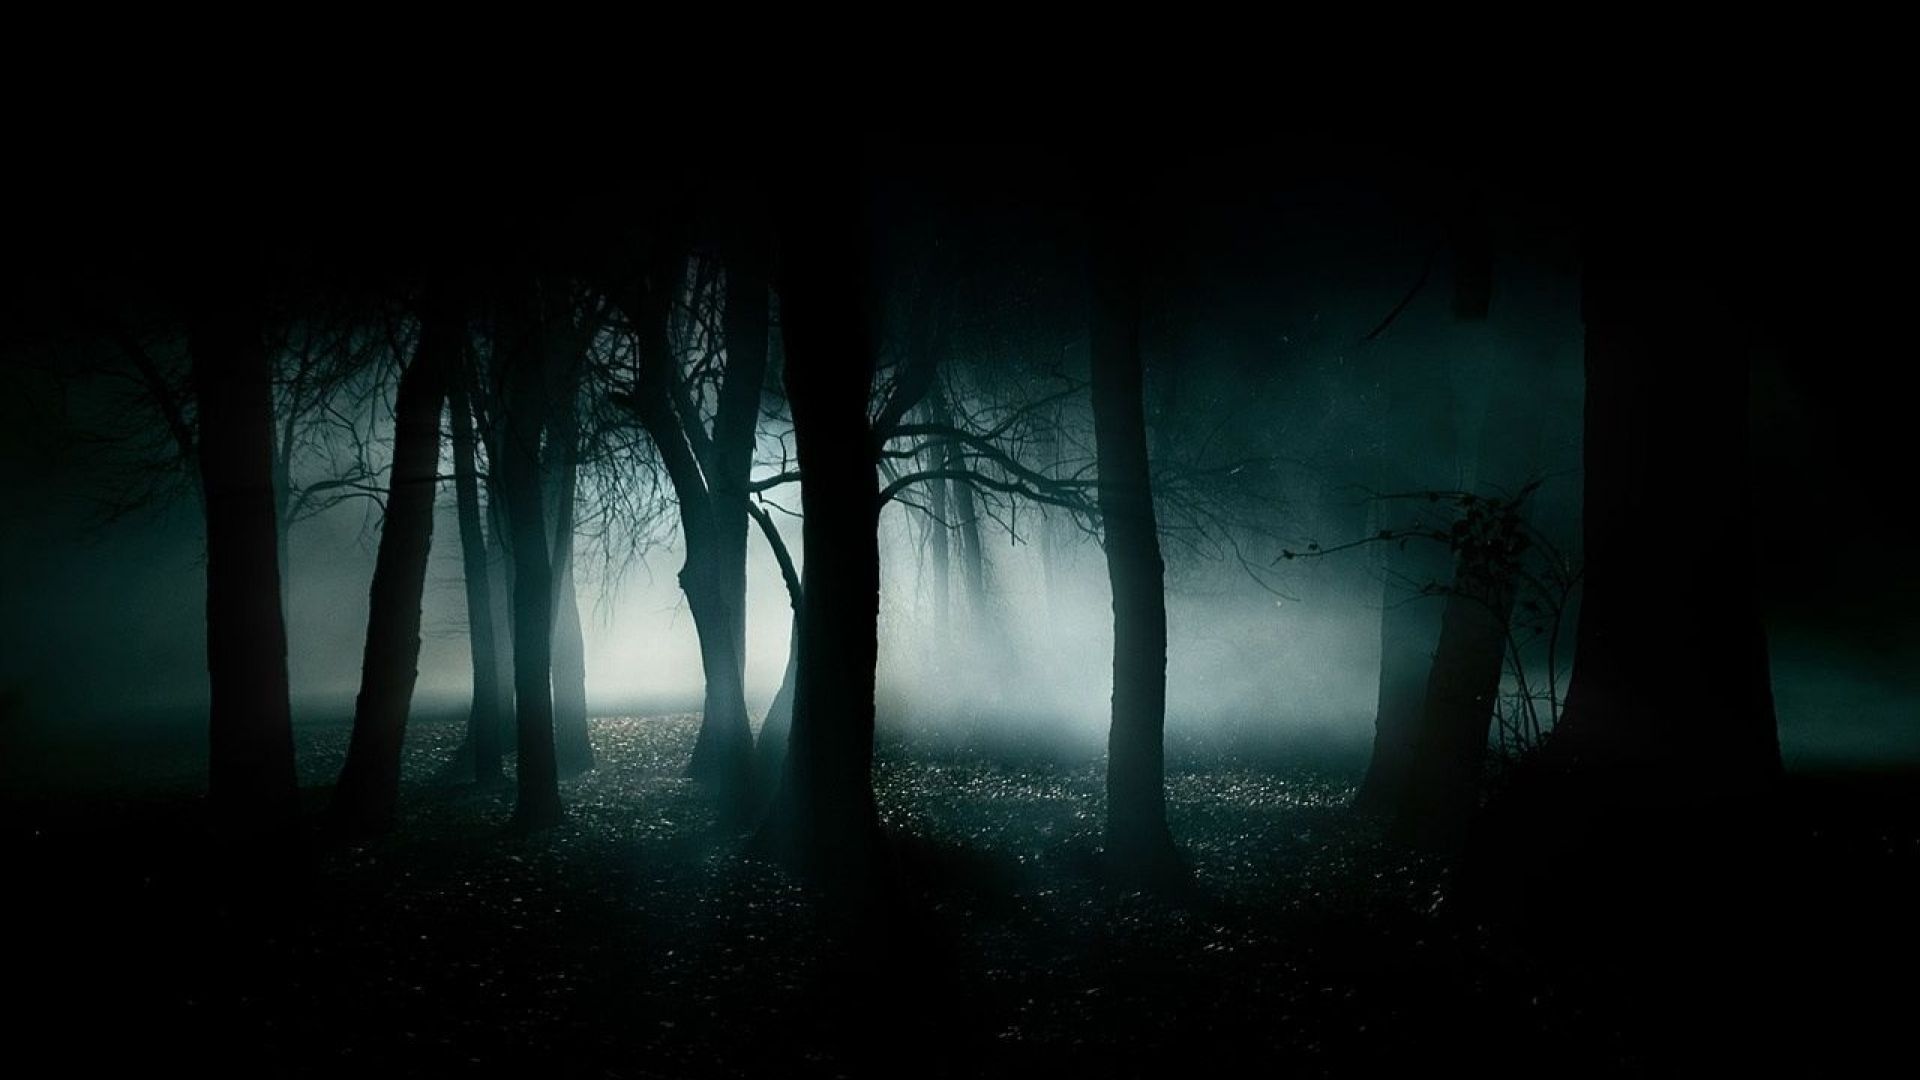 Horror New Wallpaper, Horror Images Free, New Backgrounds